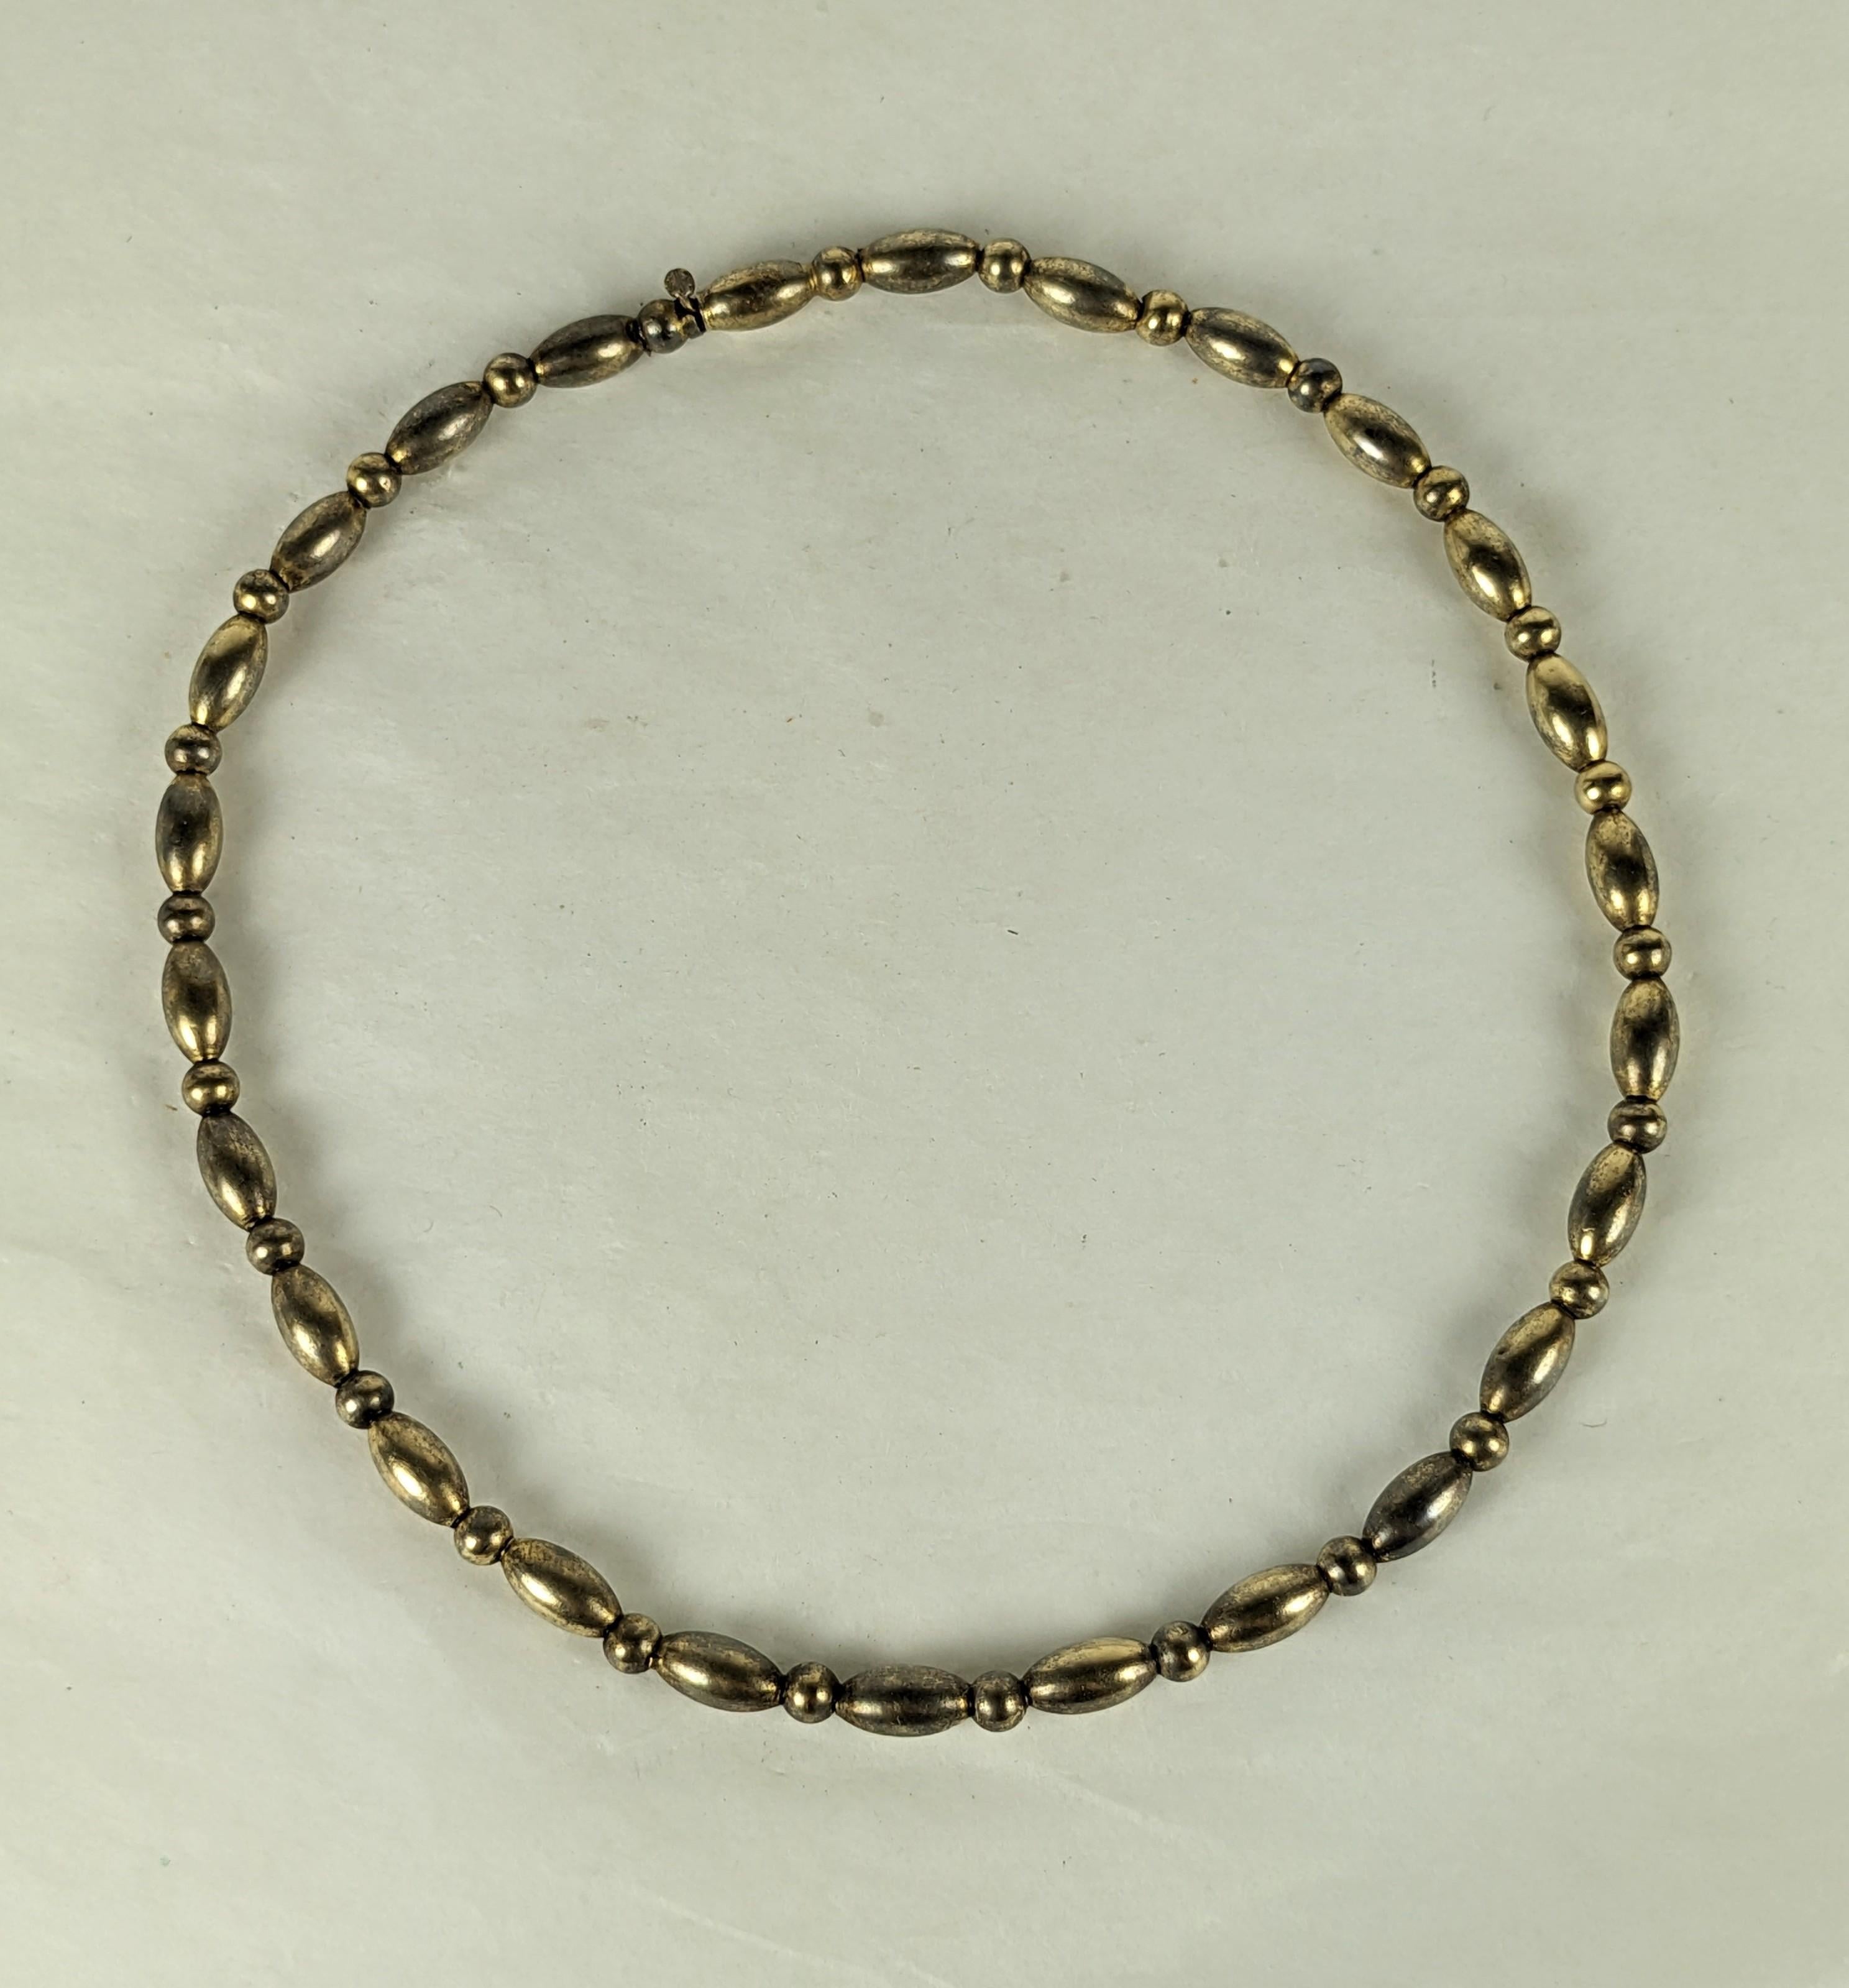 Victorian Sterling Young Girls Bead Necklace. Sterling beads in marquise and round shapes. Small size with sturdy engineered clasp. Has a light vermeil finish, 1880's USA. 12.75